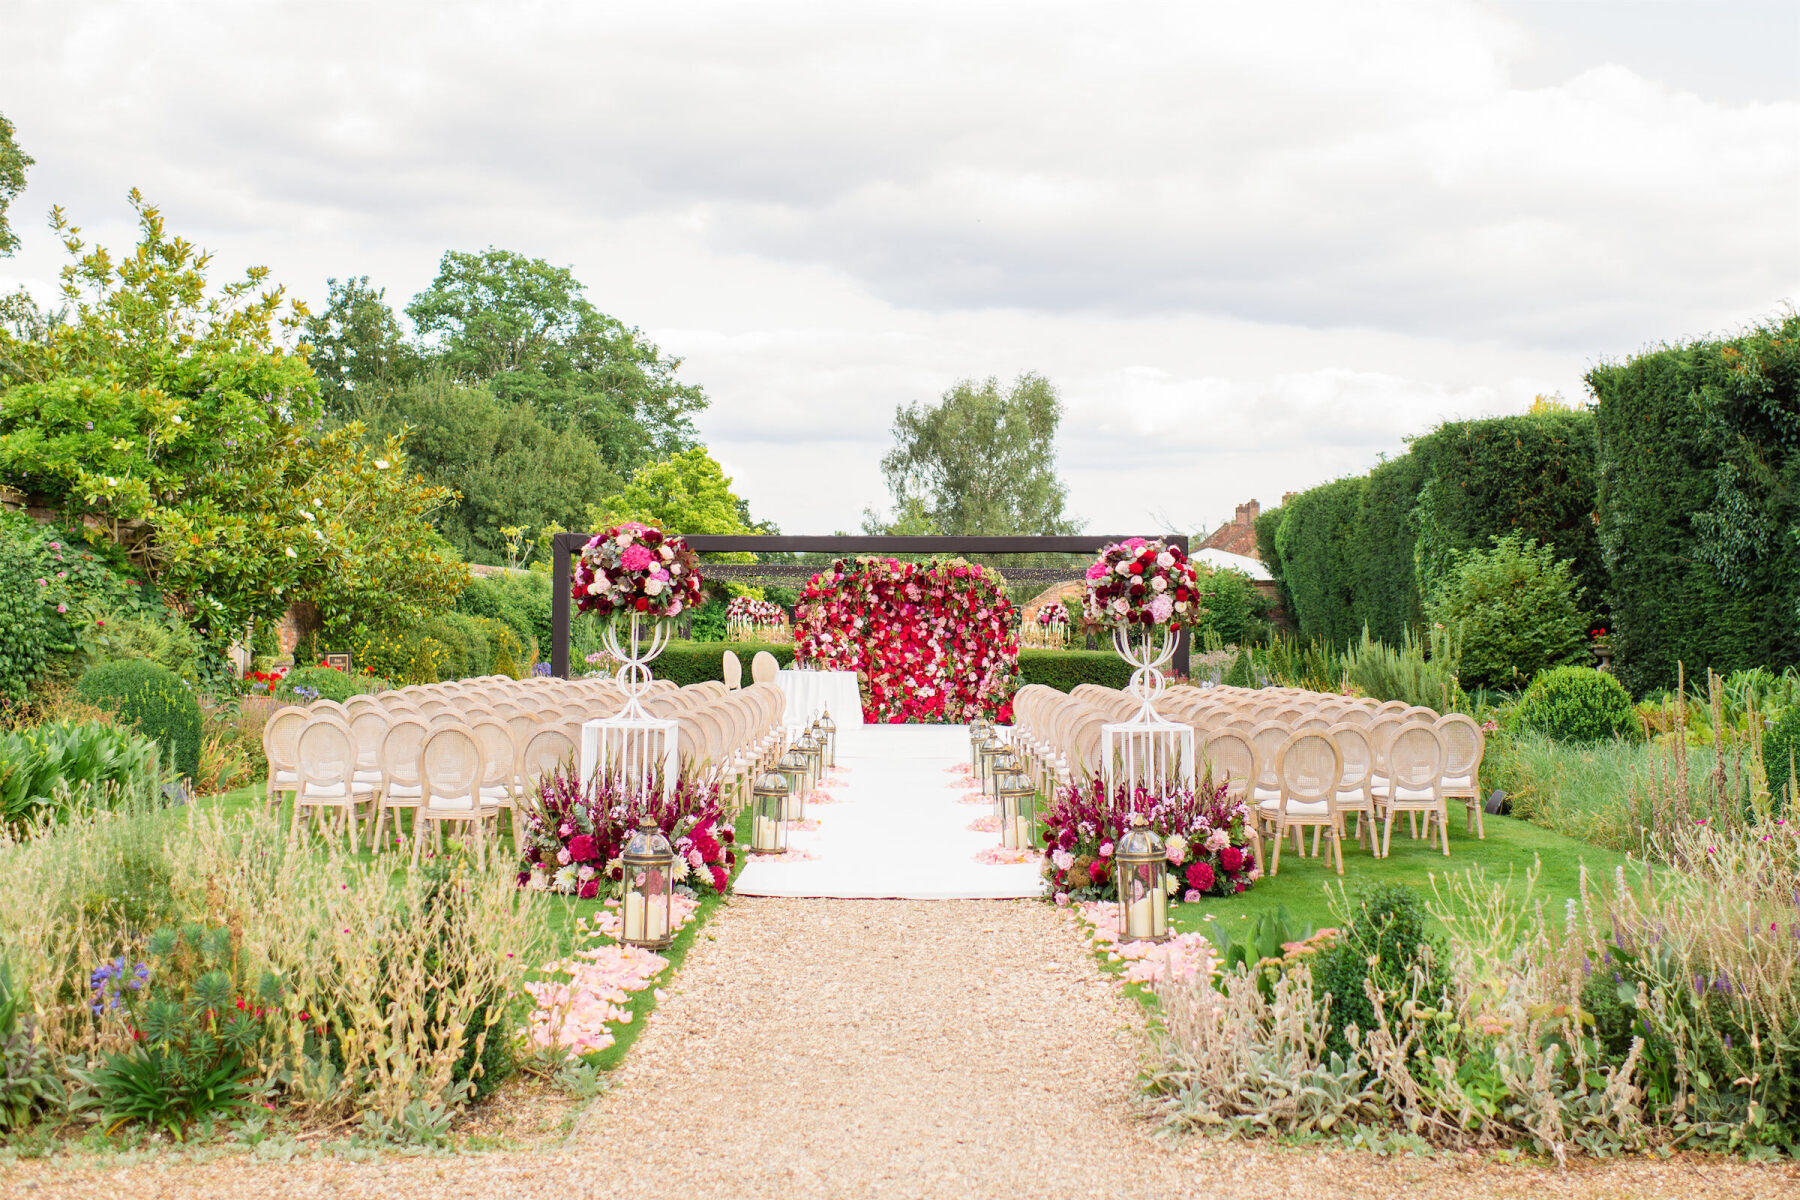 A red and pink floral wall anchored the ceremony space for a colorful countryside wedding.